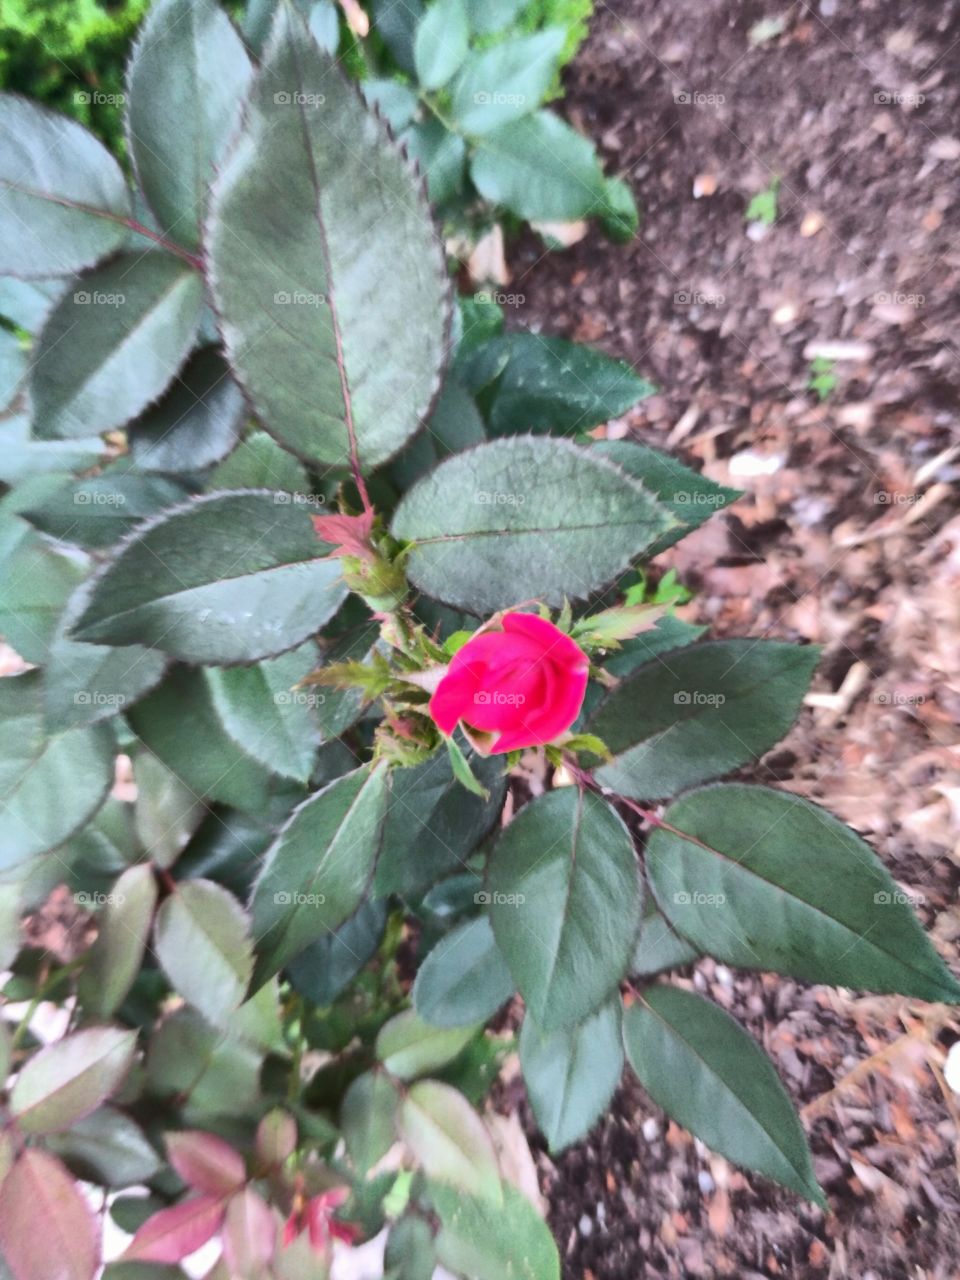 small rose beginning to bloom